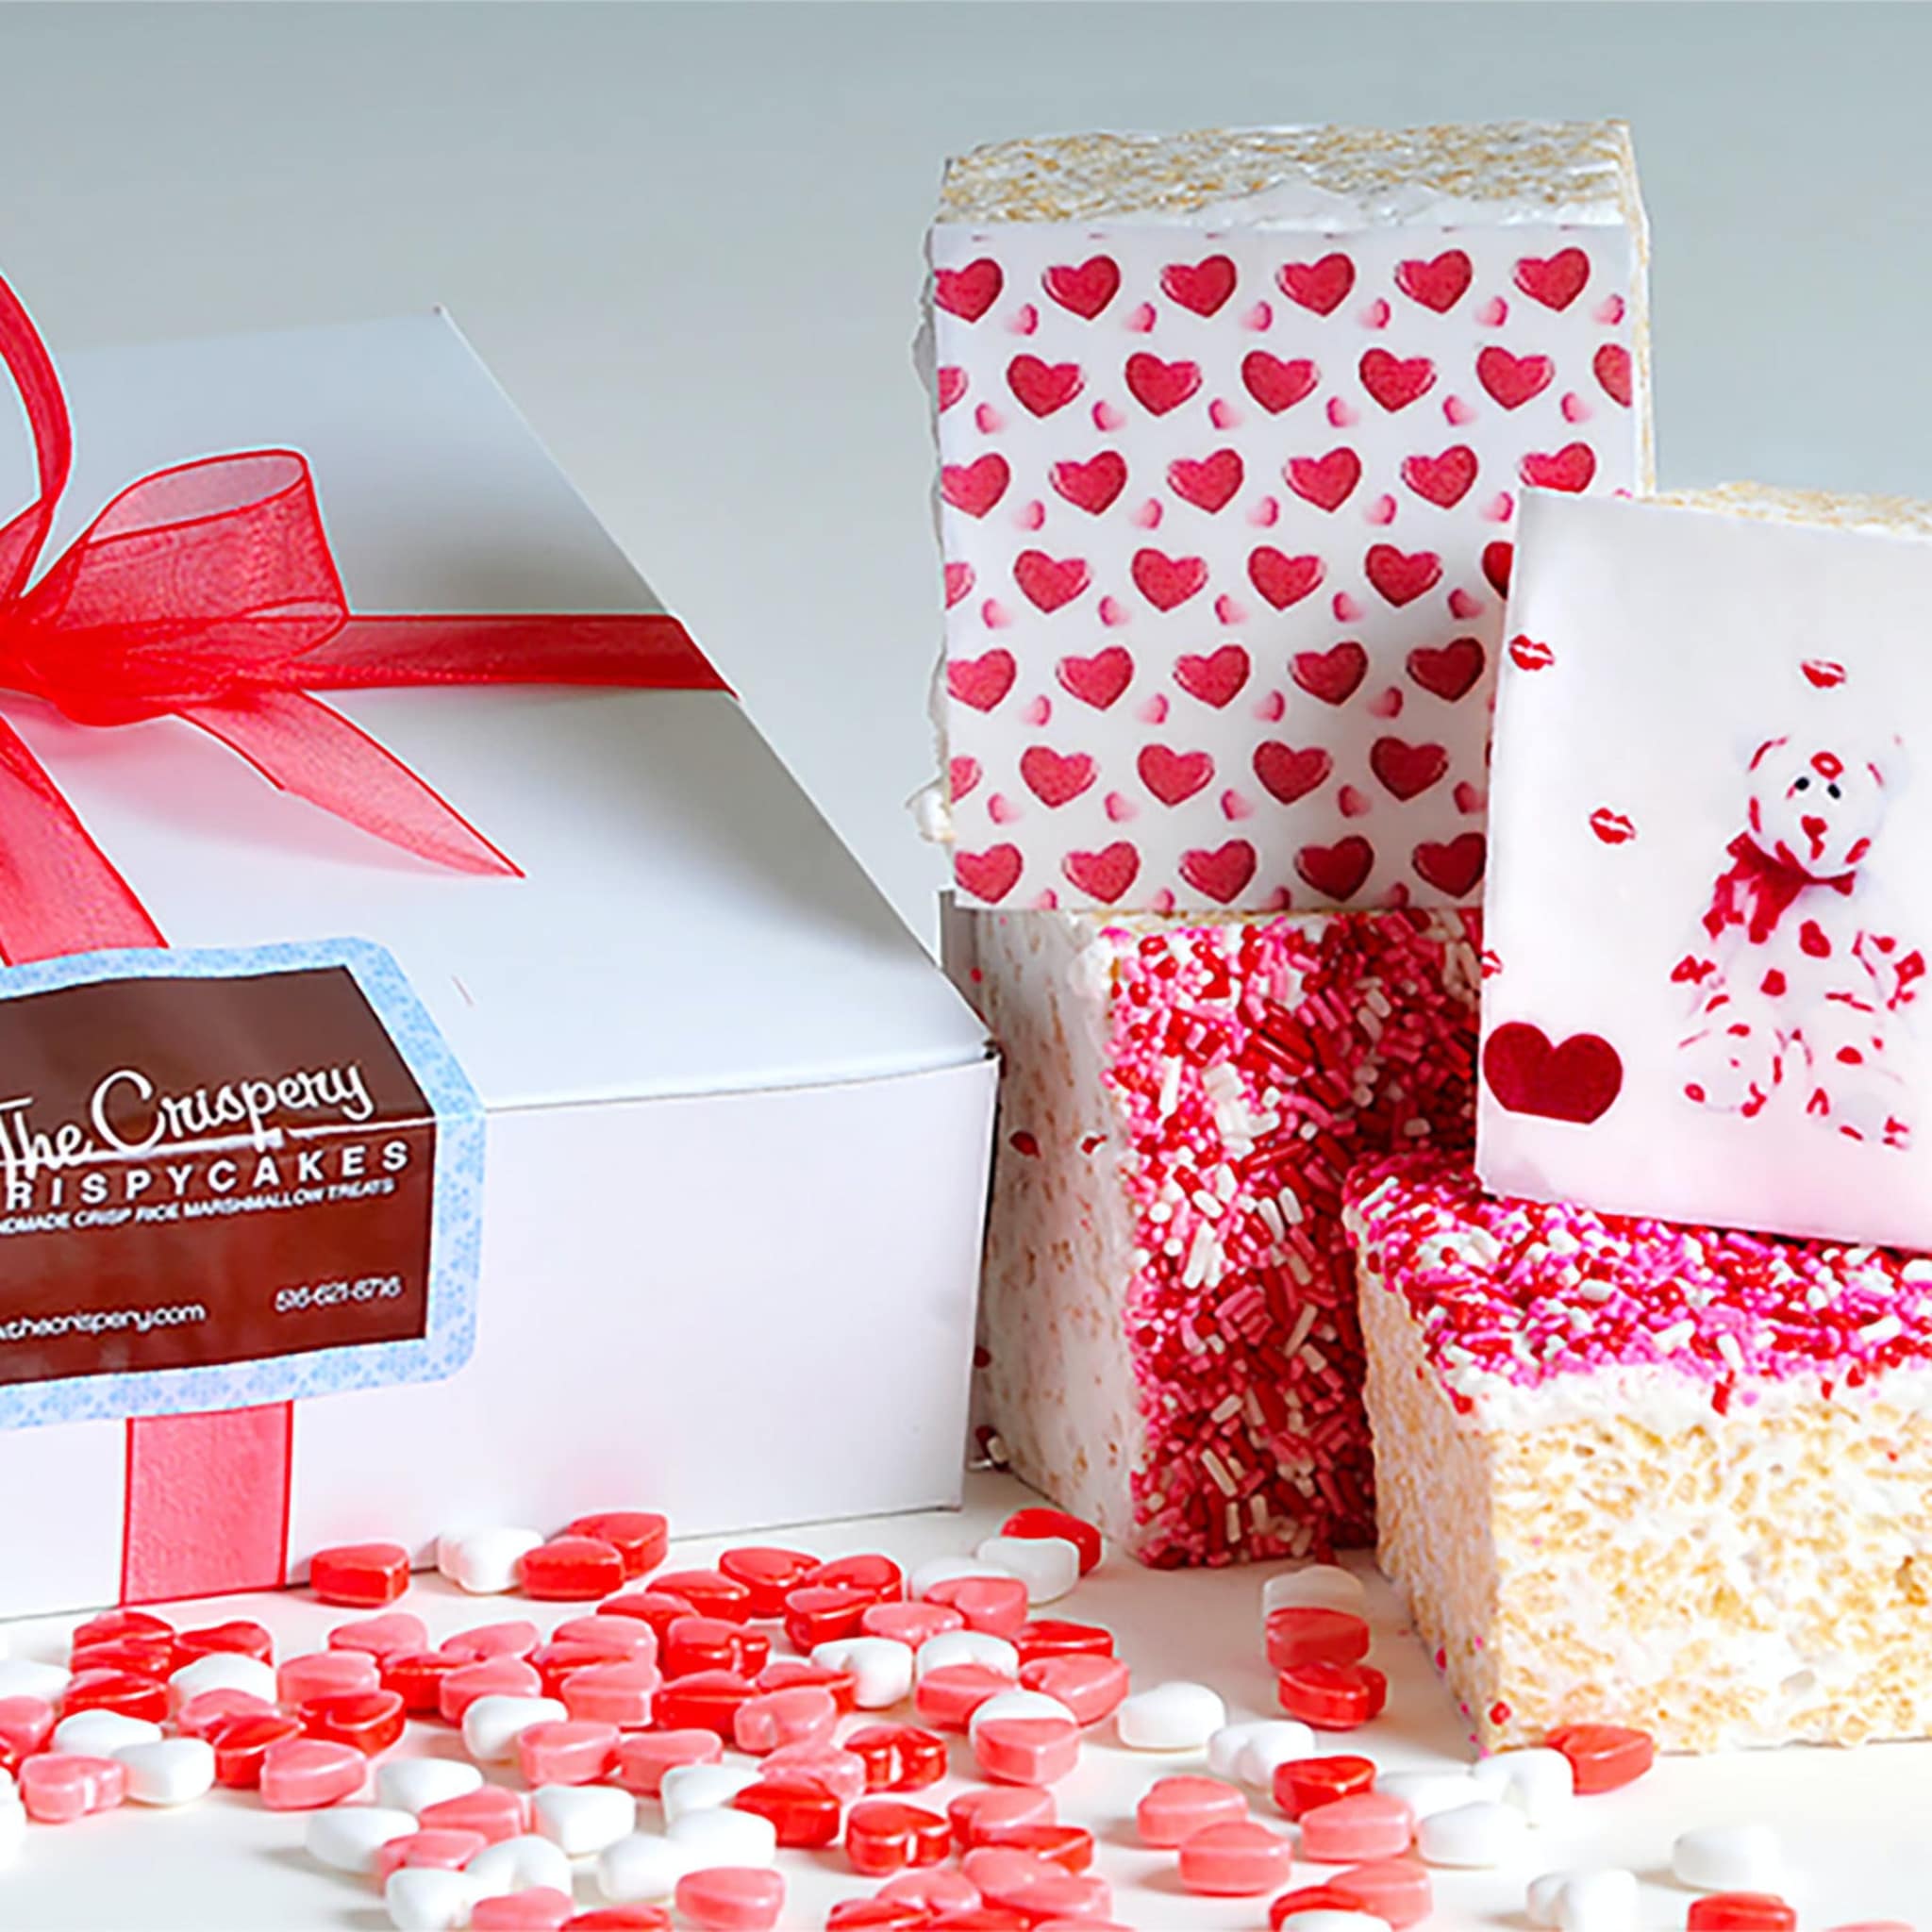 Valentine's Day gift ideas from The Crispery - rice krispy treats - red and white - pink and white - Valentine's Day ideas - delightful